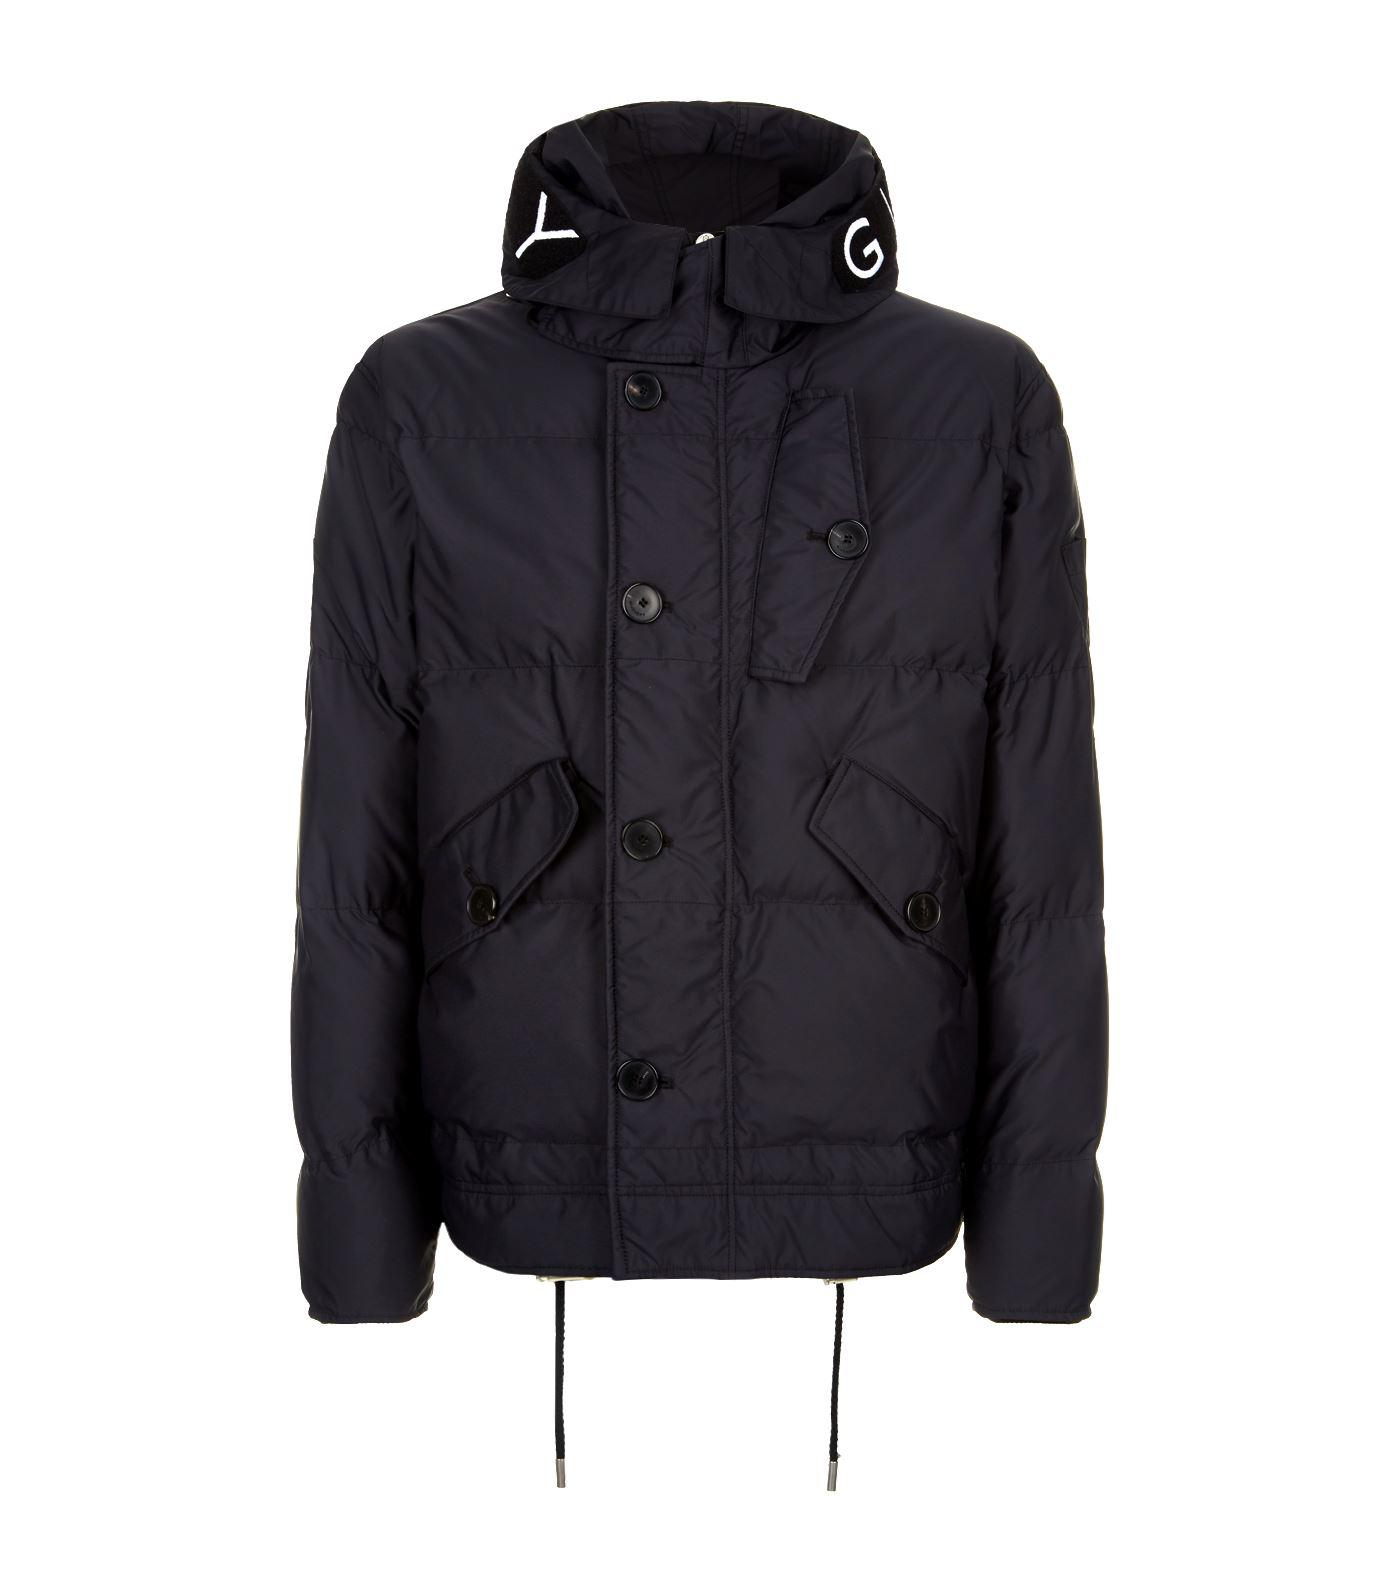 givenchy hooded puffer jacket